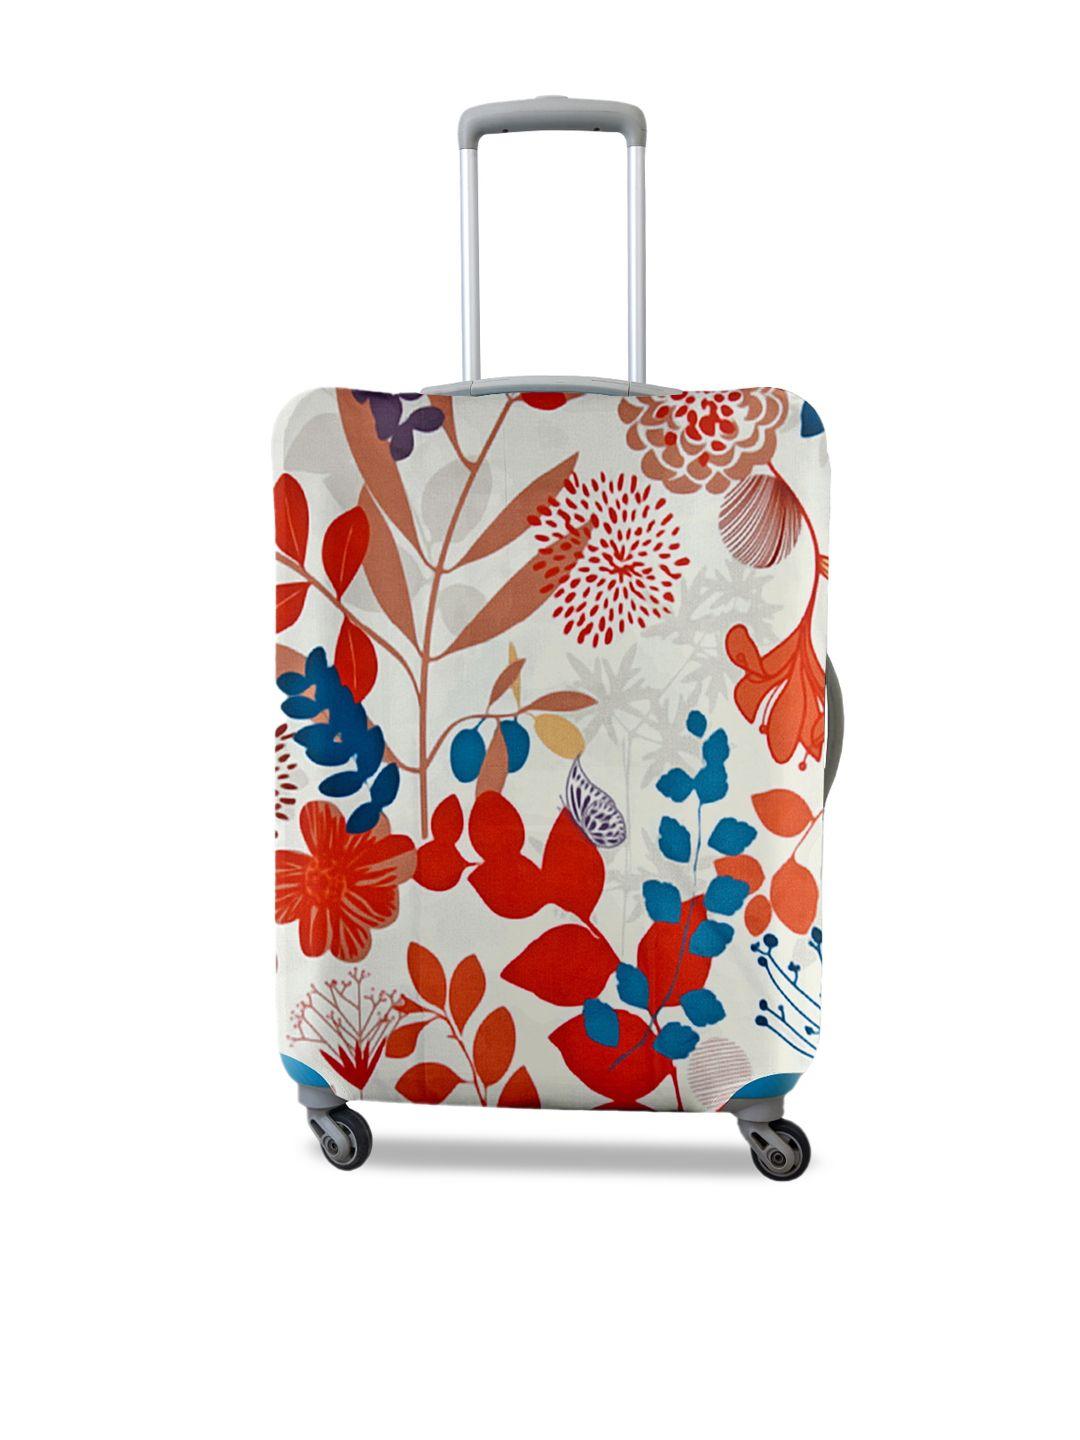 cortina white & red floral printed protective small trolley bag cover